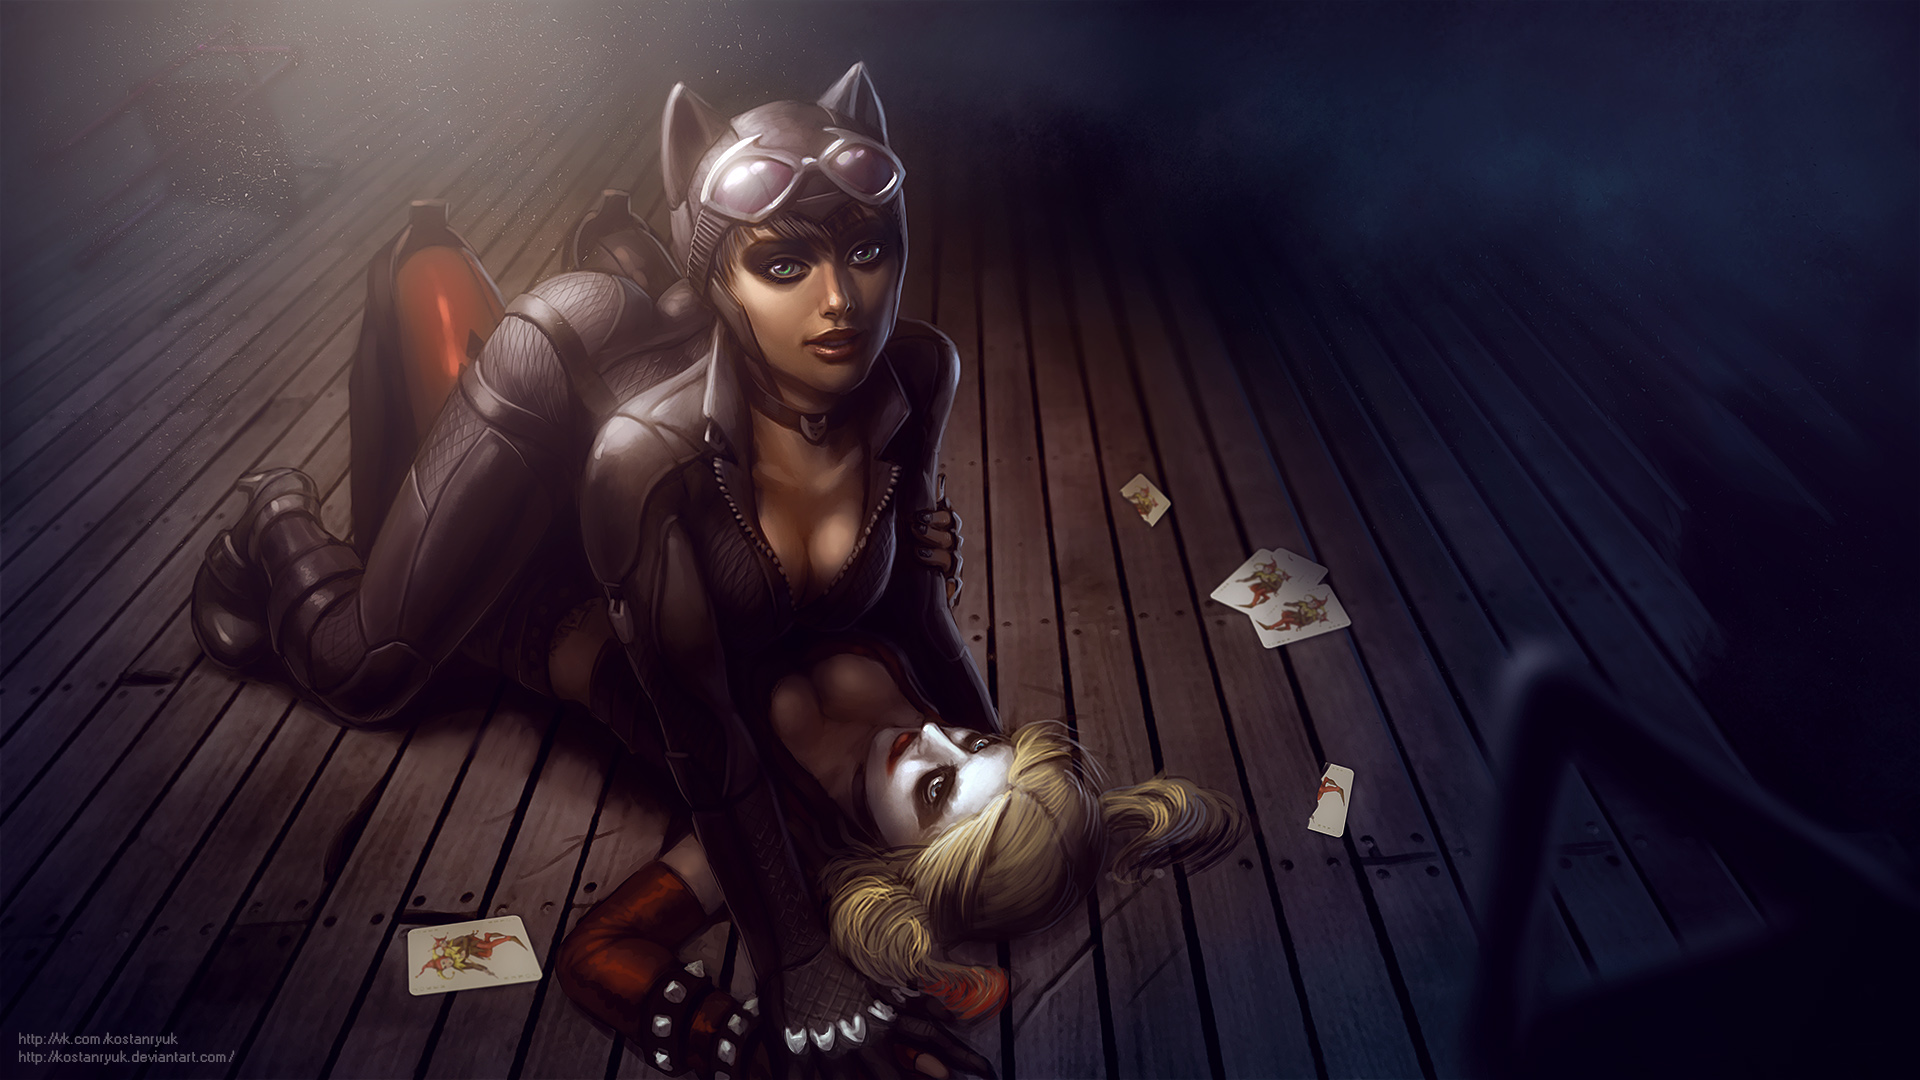 catwoman, injustice: gods among us, harley quinn, video game, injustice 32K